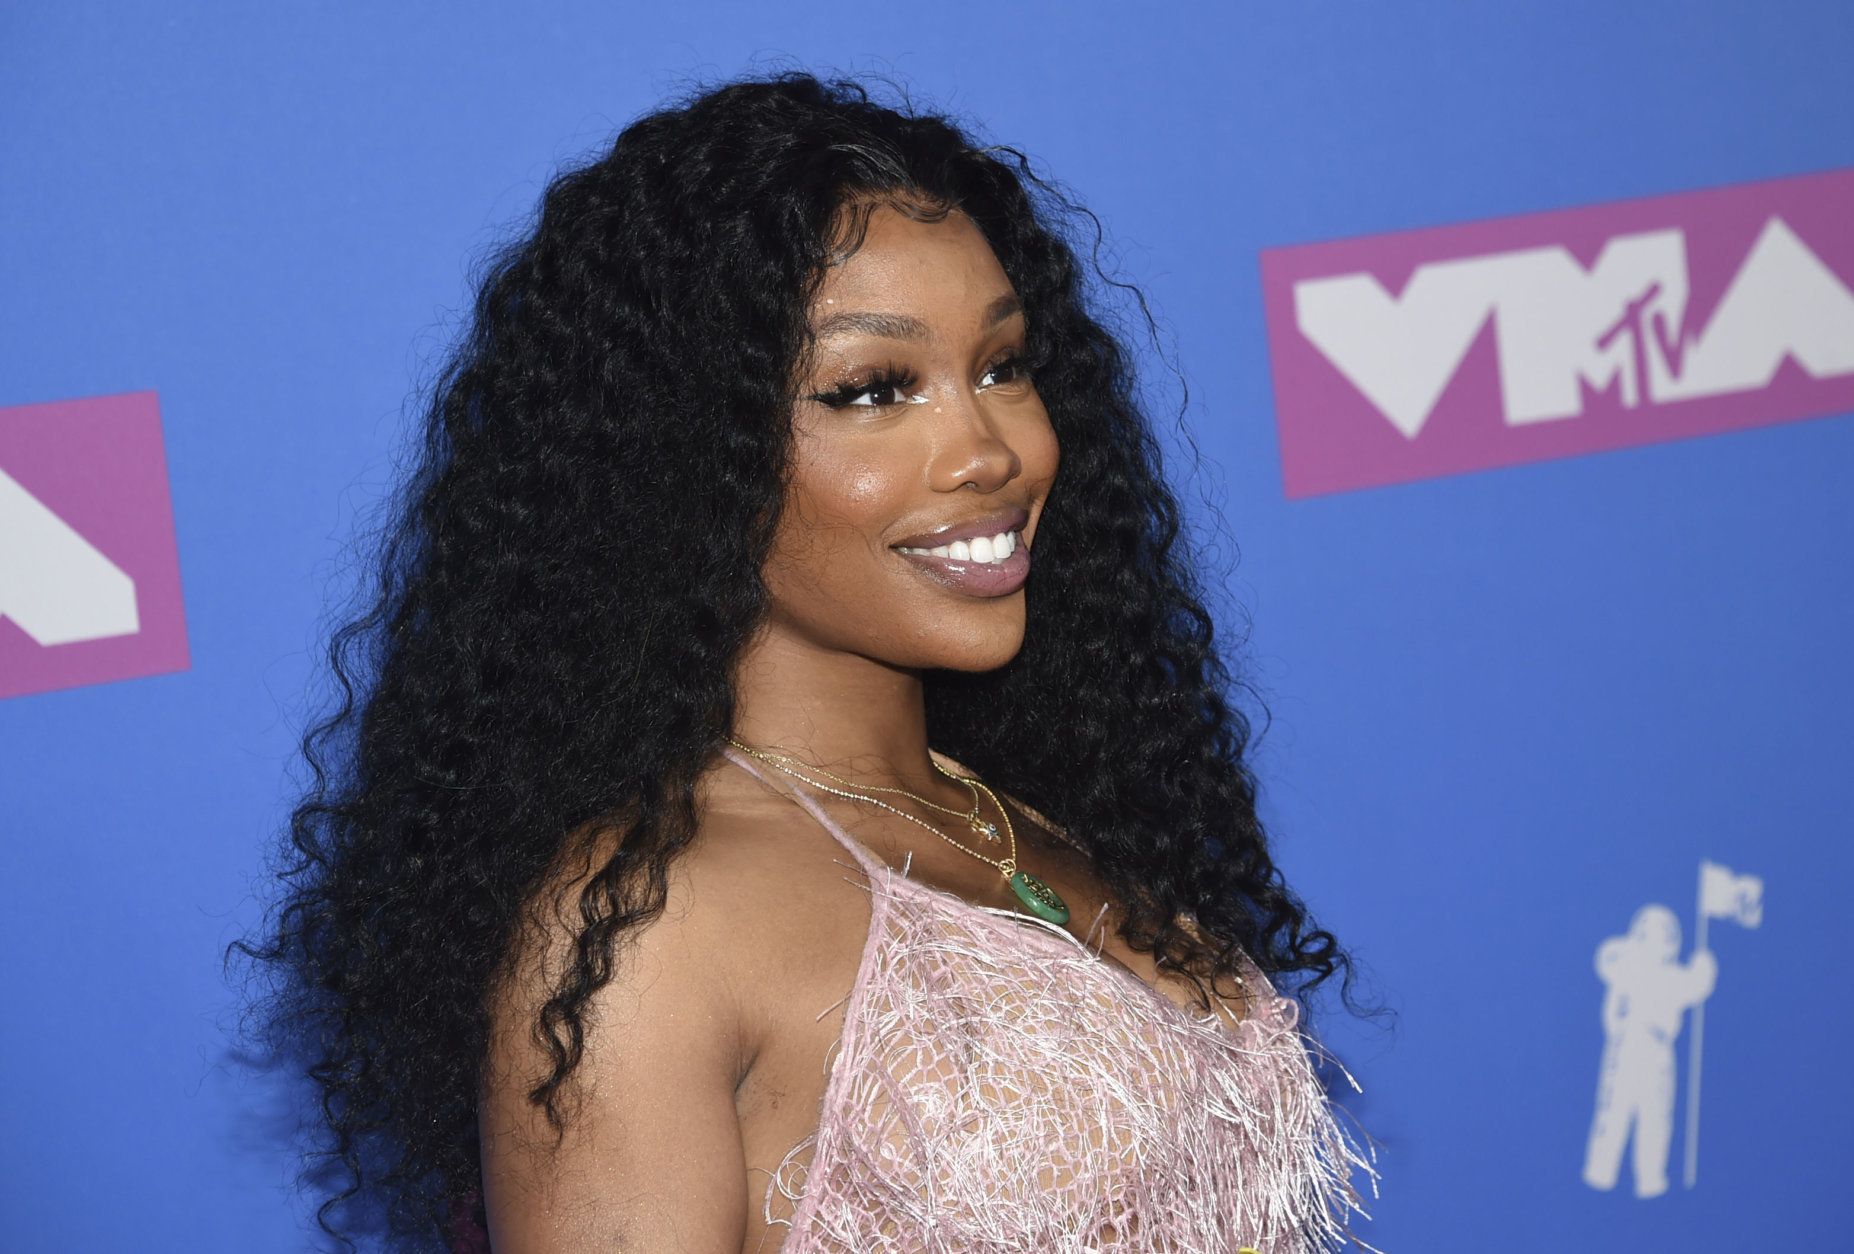 SZA arrives at the MTV Video Music Awards at Radio City Music Hall on Monday, Aug. 20, 2018, in New York. (Photo by Evan Agostini/Invision/AP)